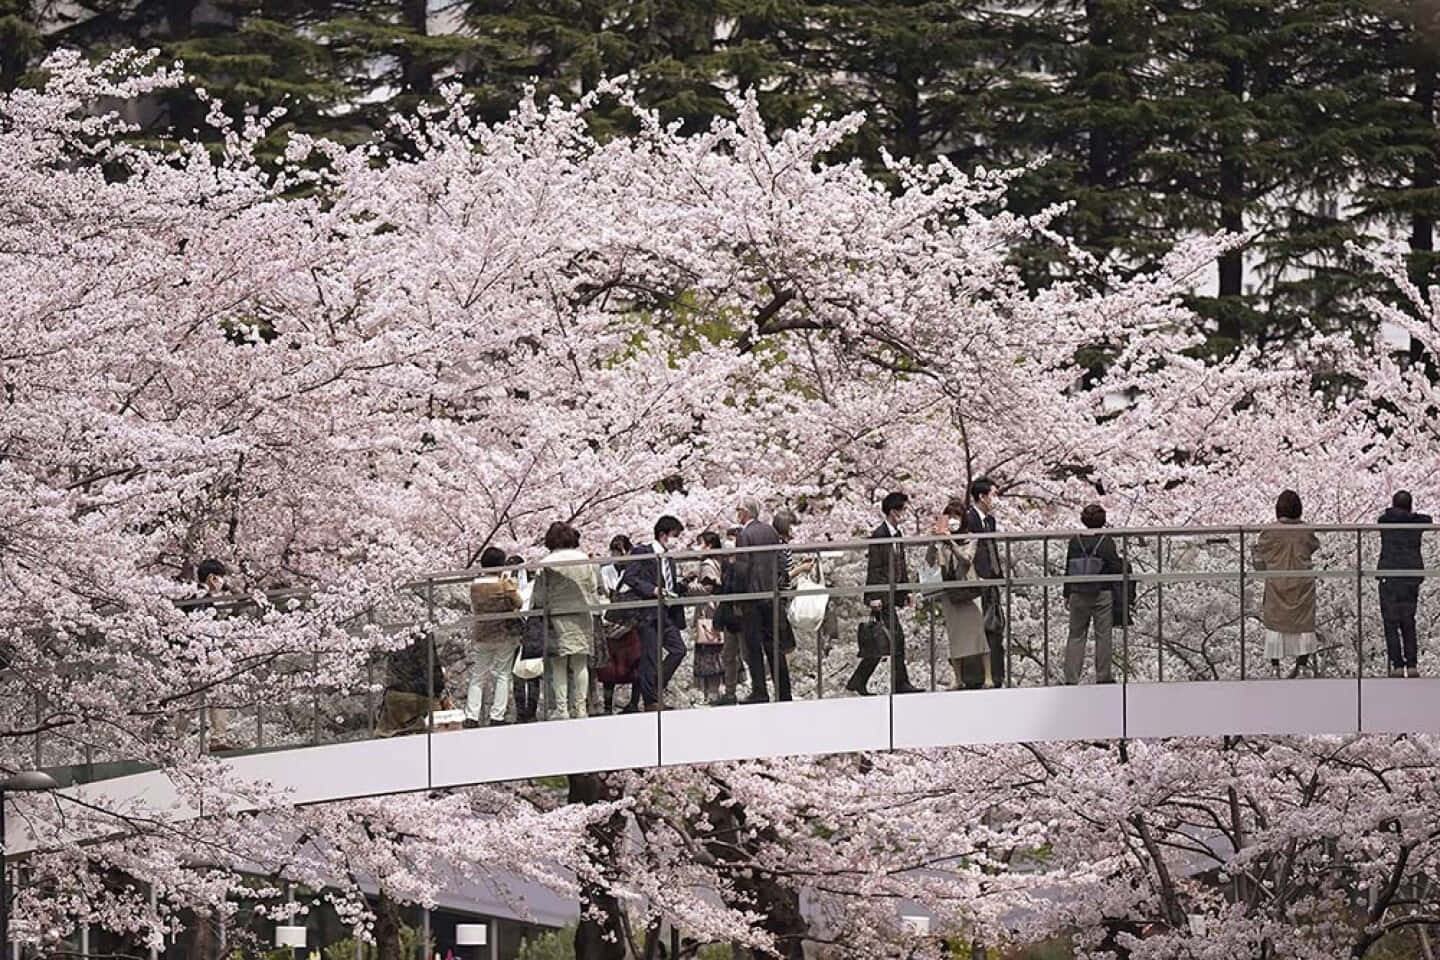 People Standing On A Bridge With Cherry Blossoms